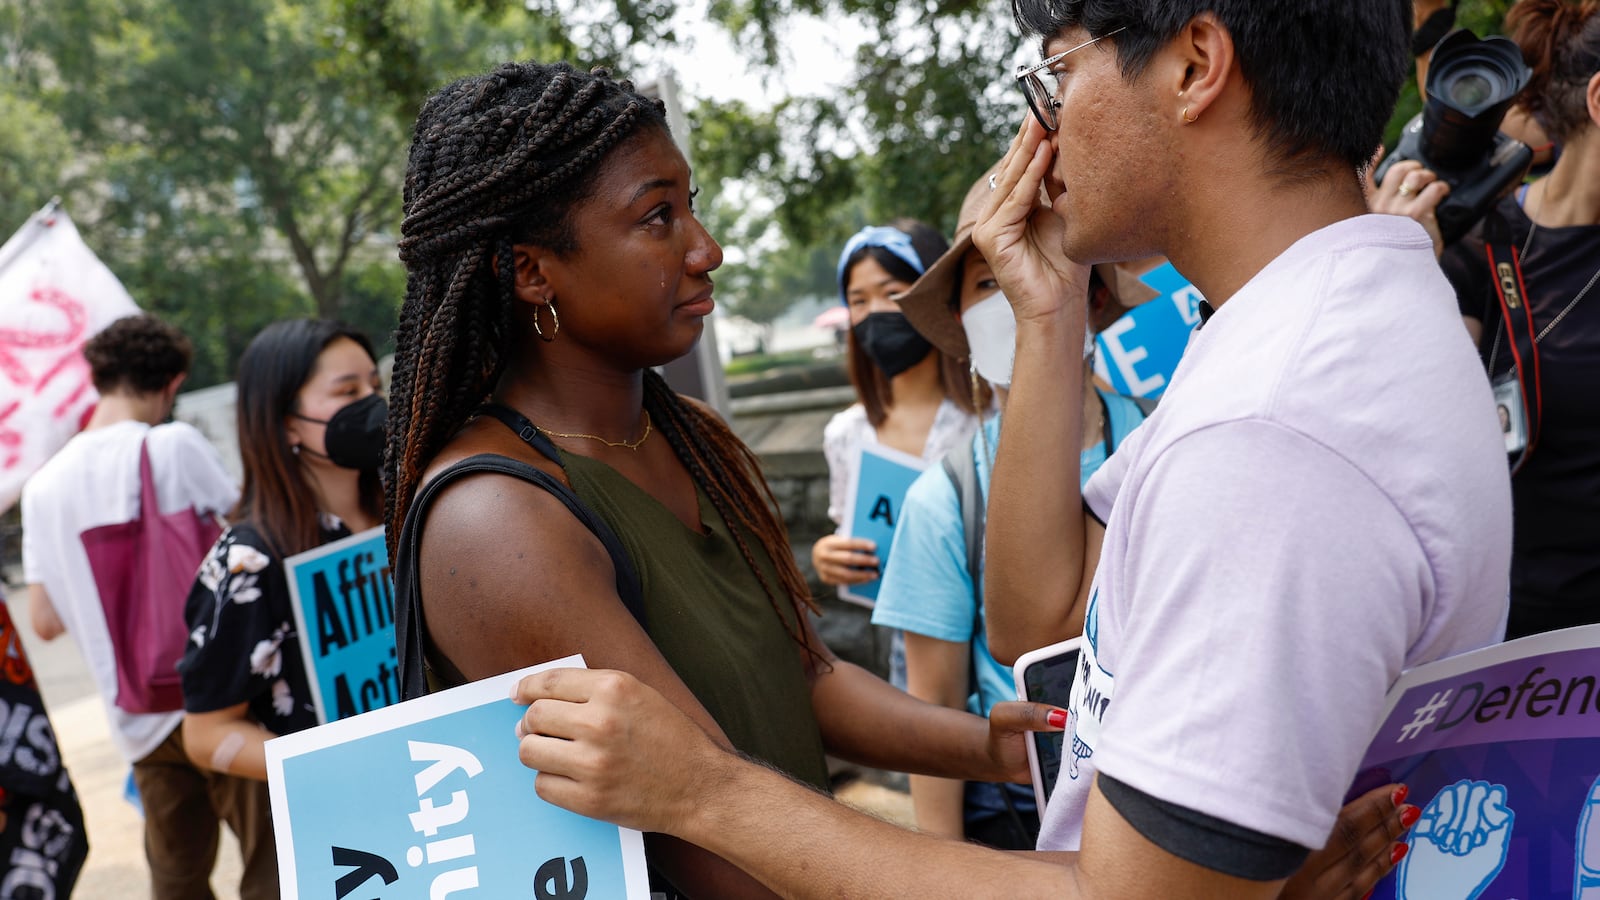 A young woman embraces a young man react with emotion to the news of the affirmative action ruling. They are carrying signs and embracing.